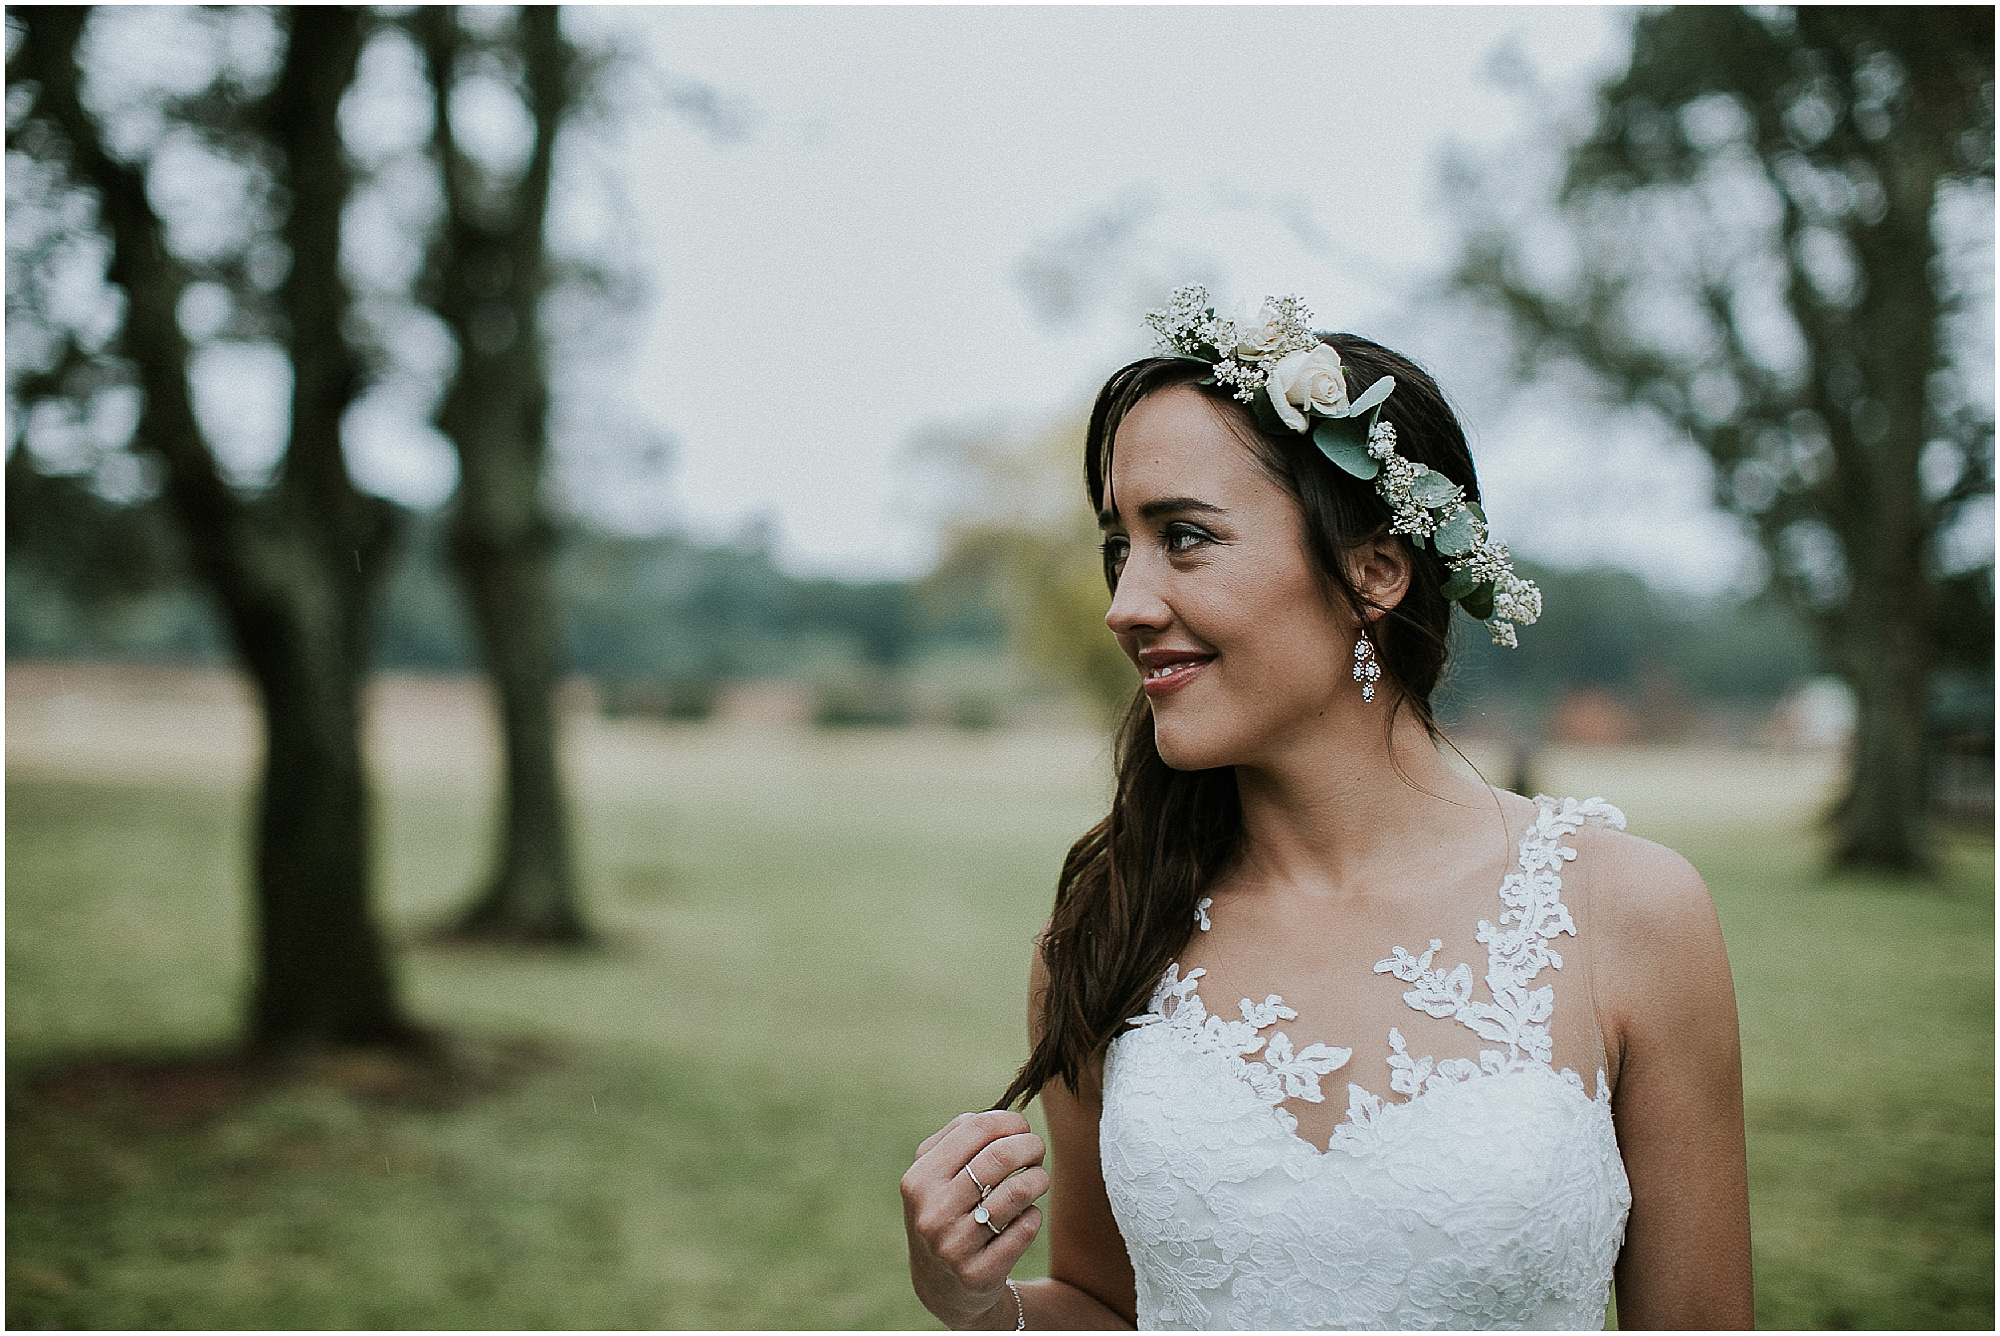 Outdoor-Forest-Destination-Wedding-Photographer-Maryke-Albertyn-Photography-Looks-Like-Film-Authentic-Alternative-Cape-Town-Pretoria-Silver-Sixpence-Dullstroom-Bridal-Portraits-Flower-Crown